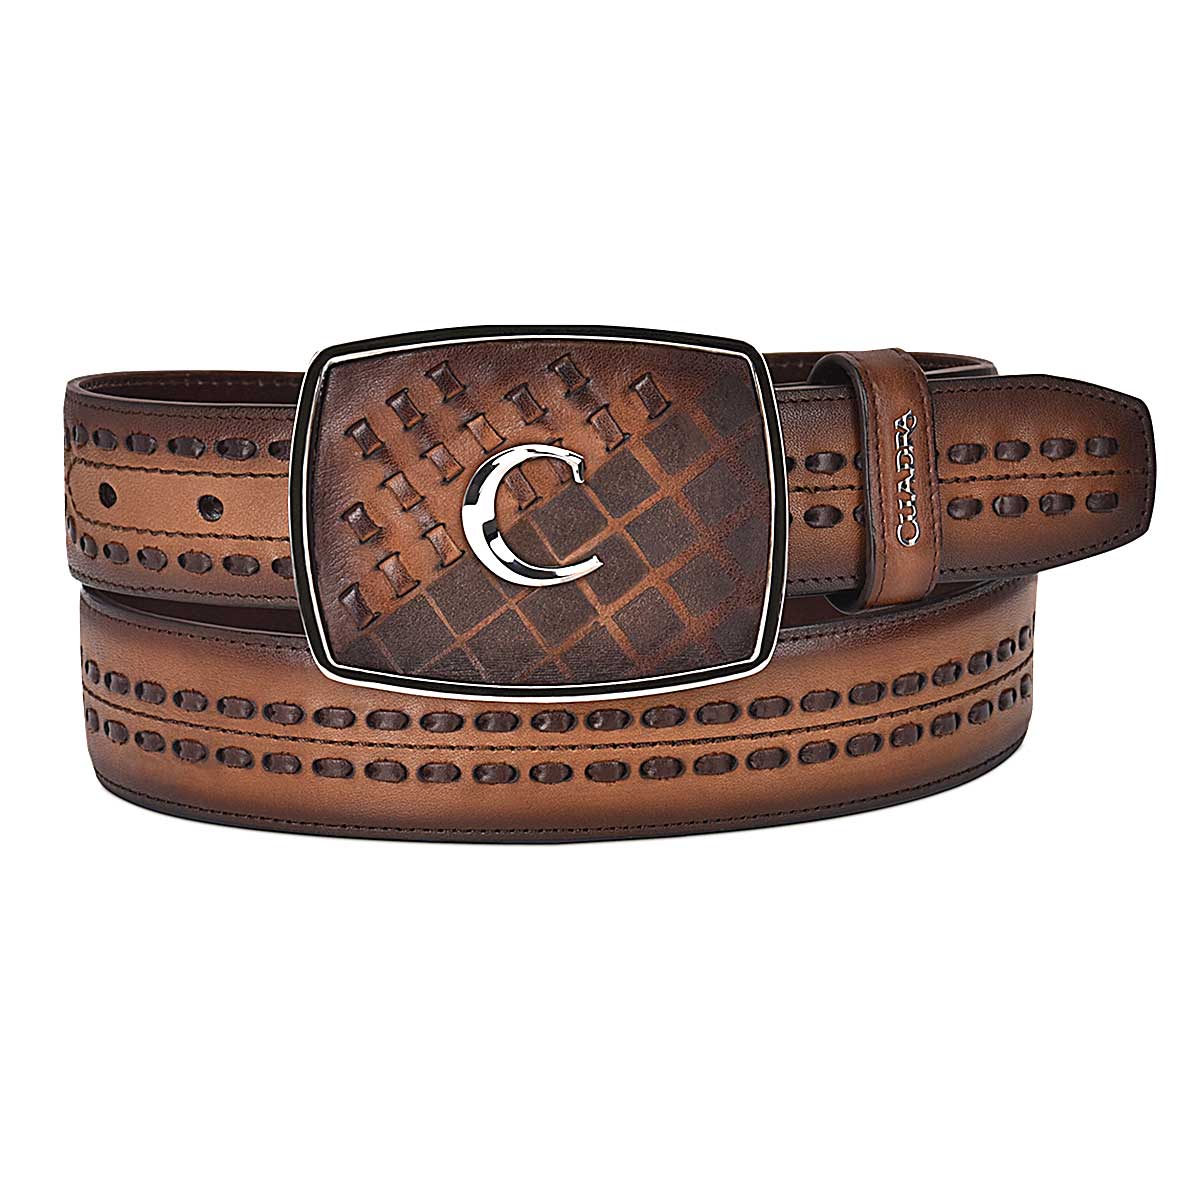 Hand-painted engraved honey western leather belt 2